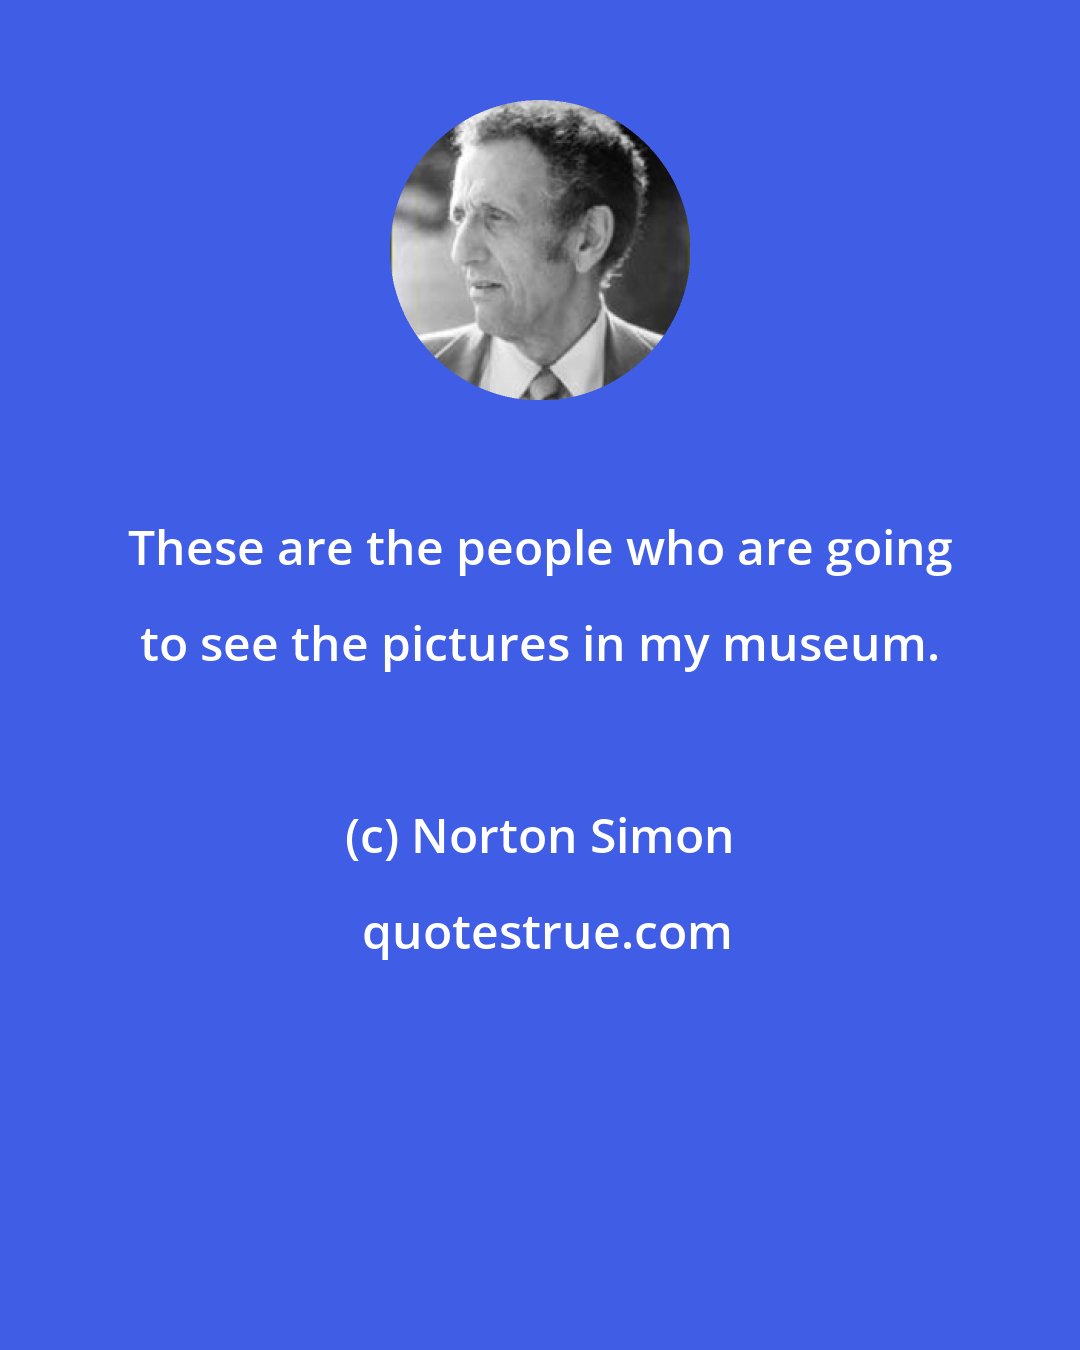 Norton Simon: These are the people who are going to see the pictures in my museum.